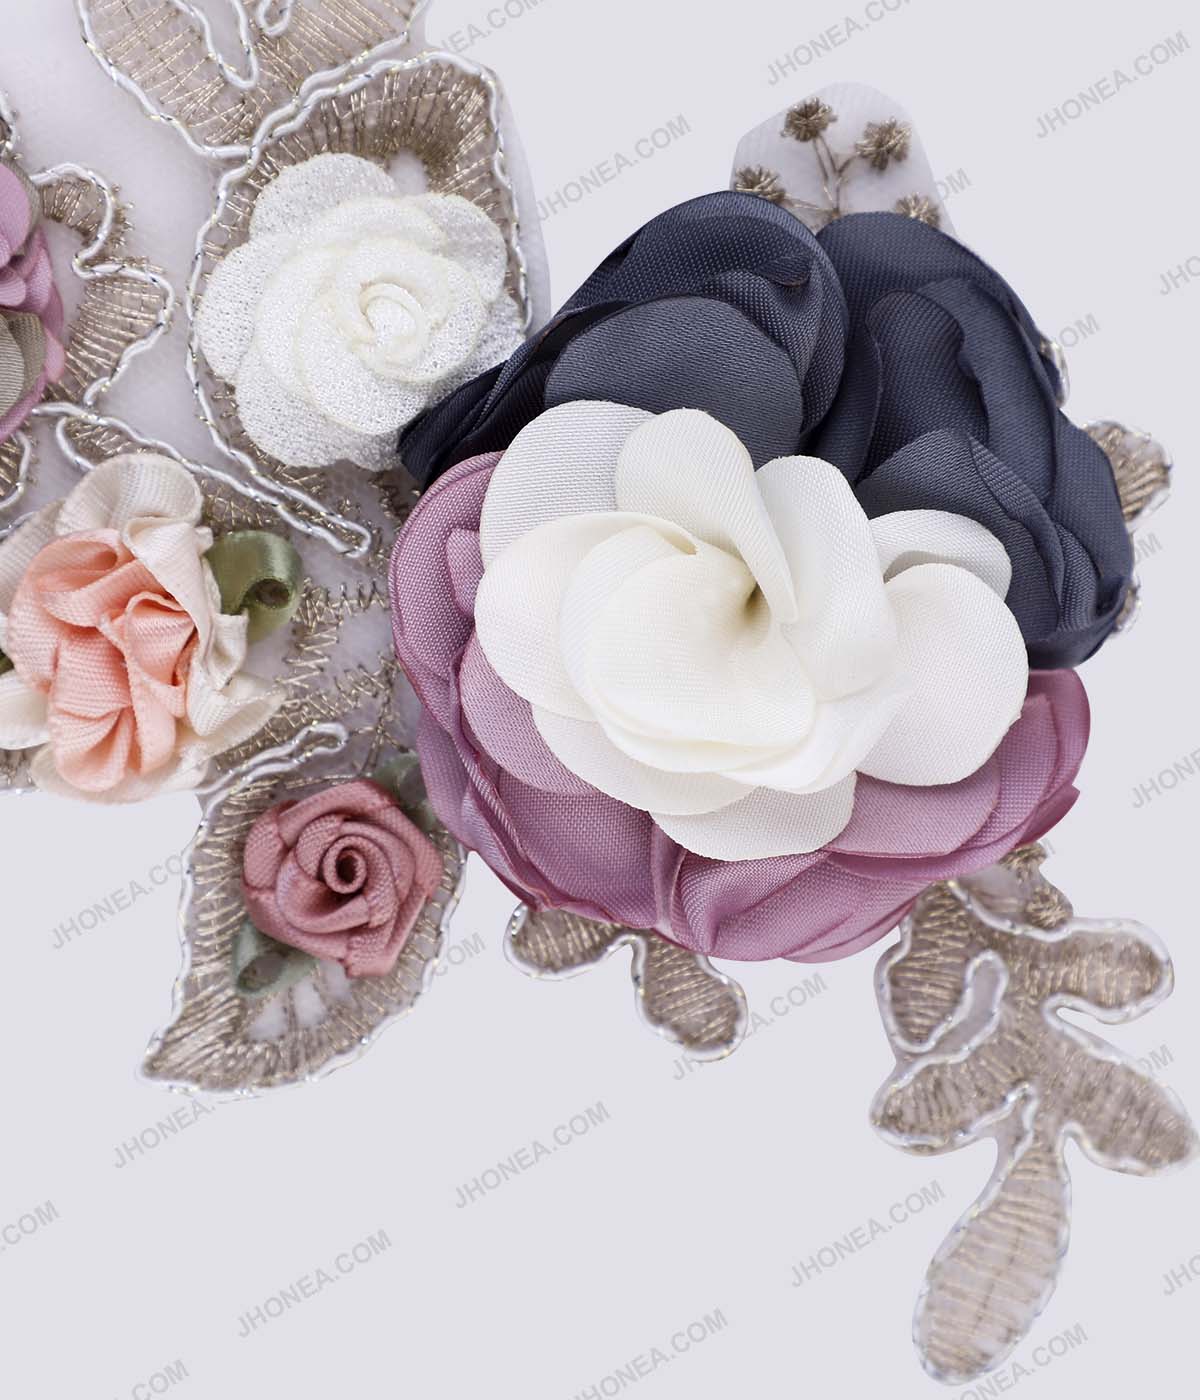 Embroidery Flower Patch For Bridesmaid Dresses